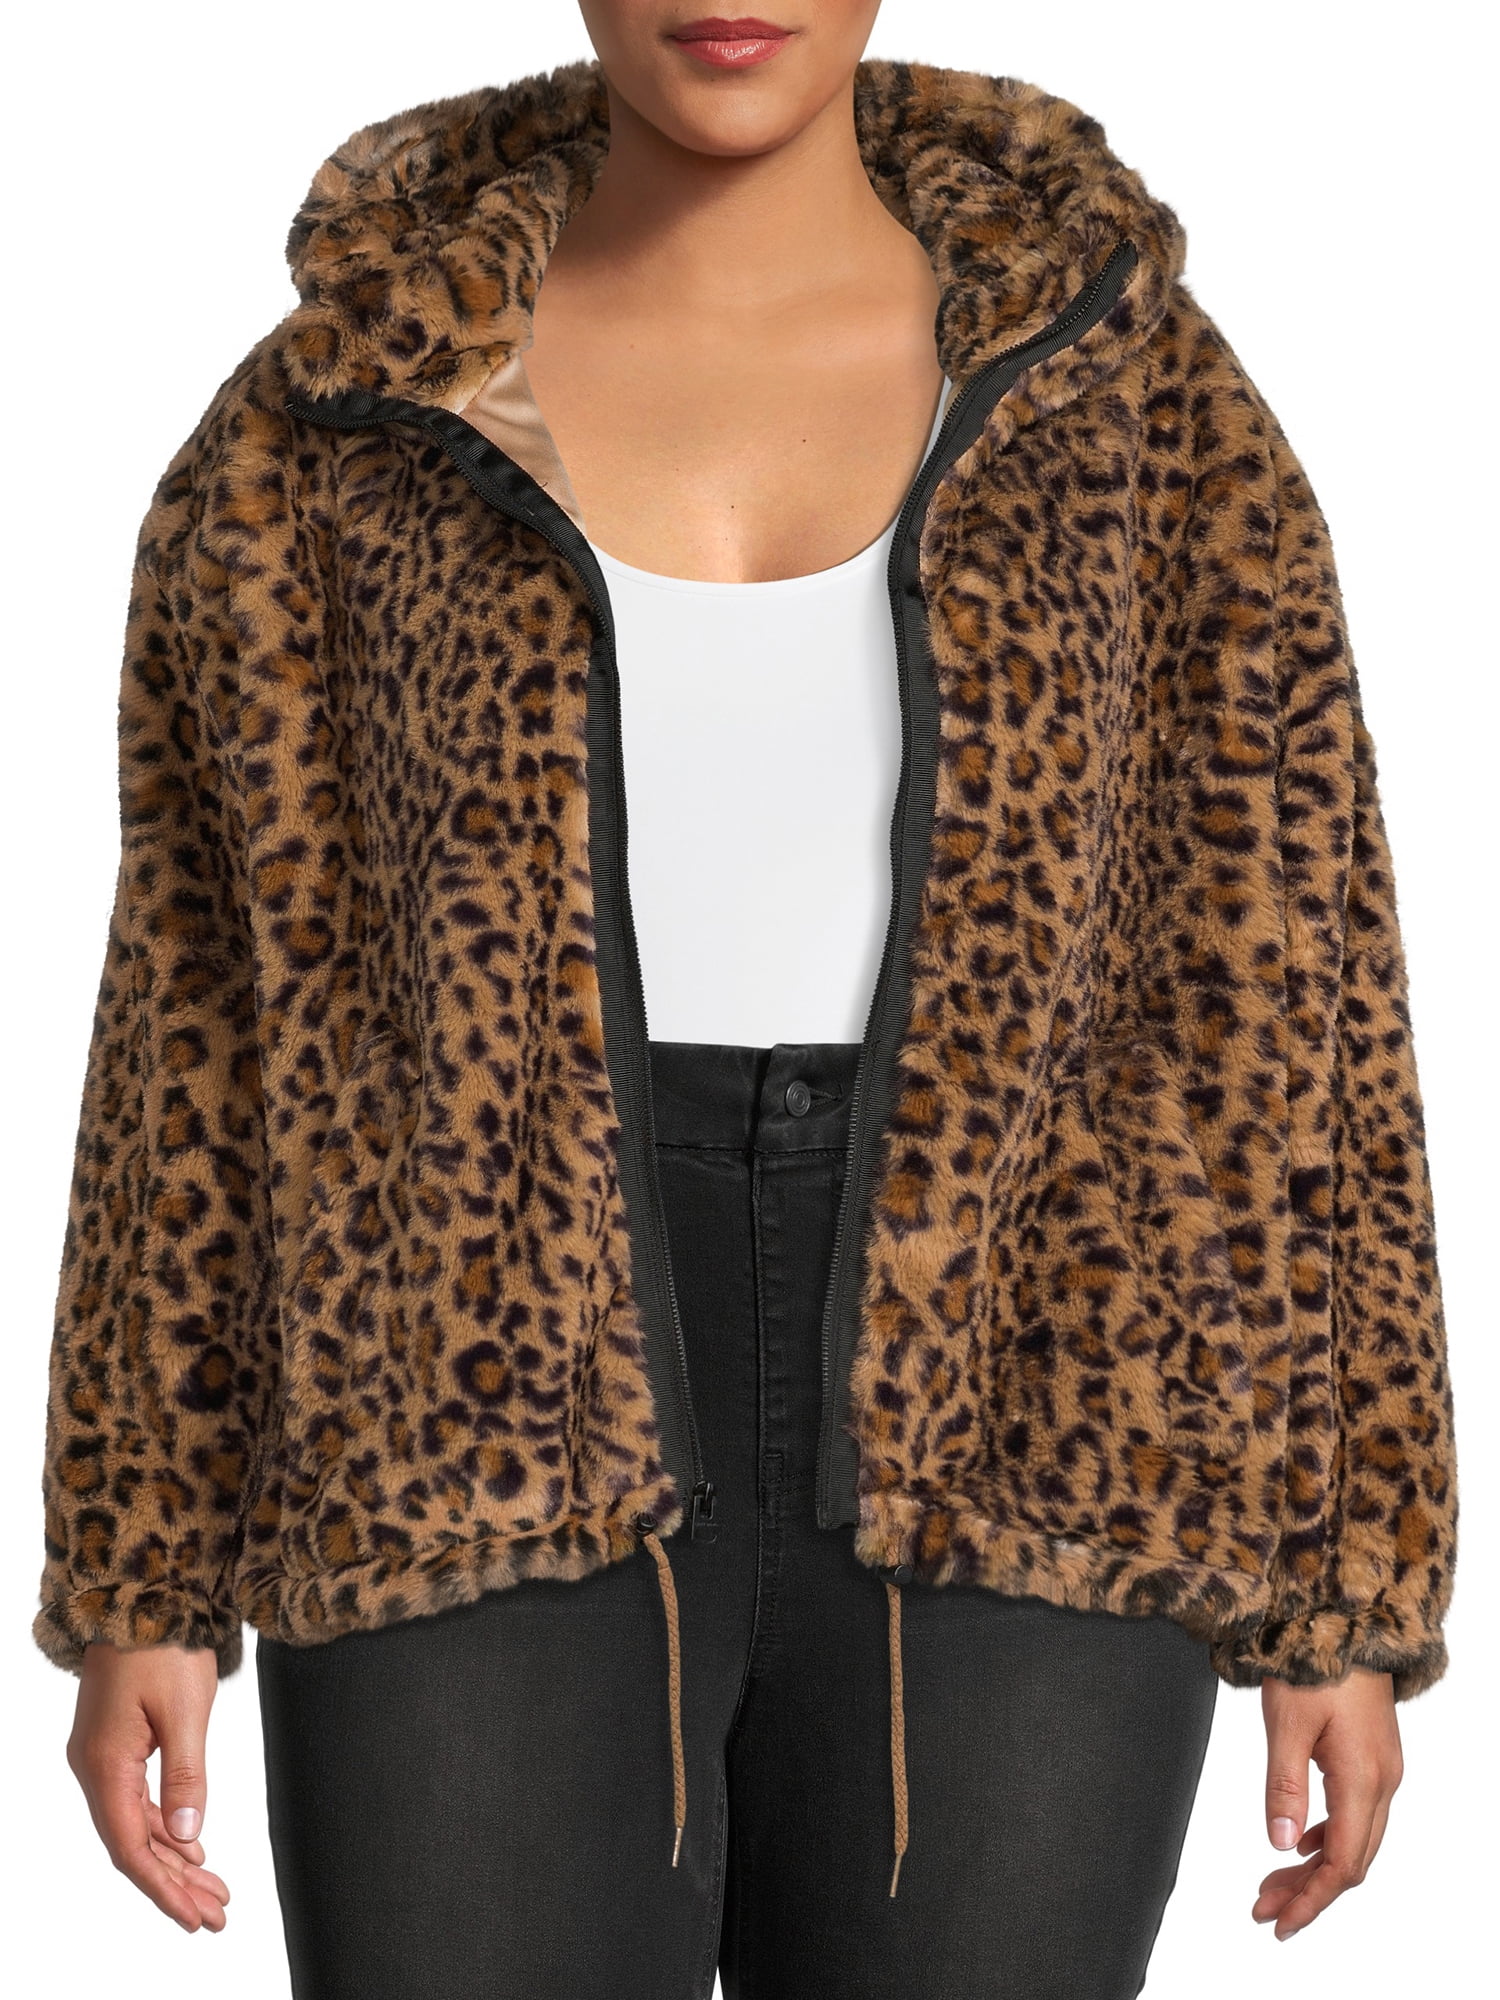 Lucky Brand, Jackets & Coats, Lucky Brand Missy Faux Fur Jacket